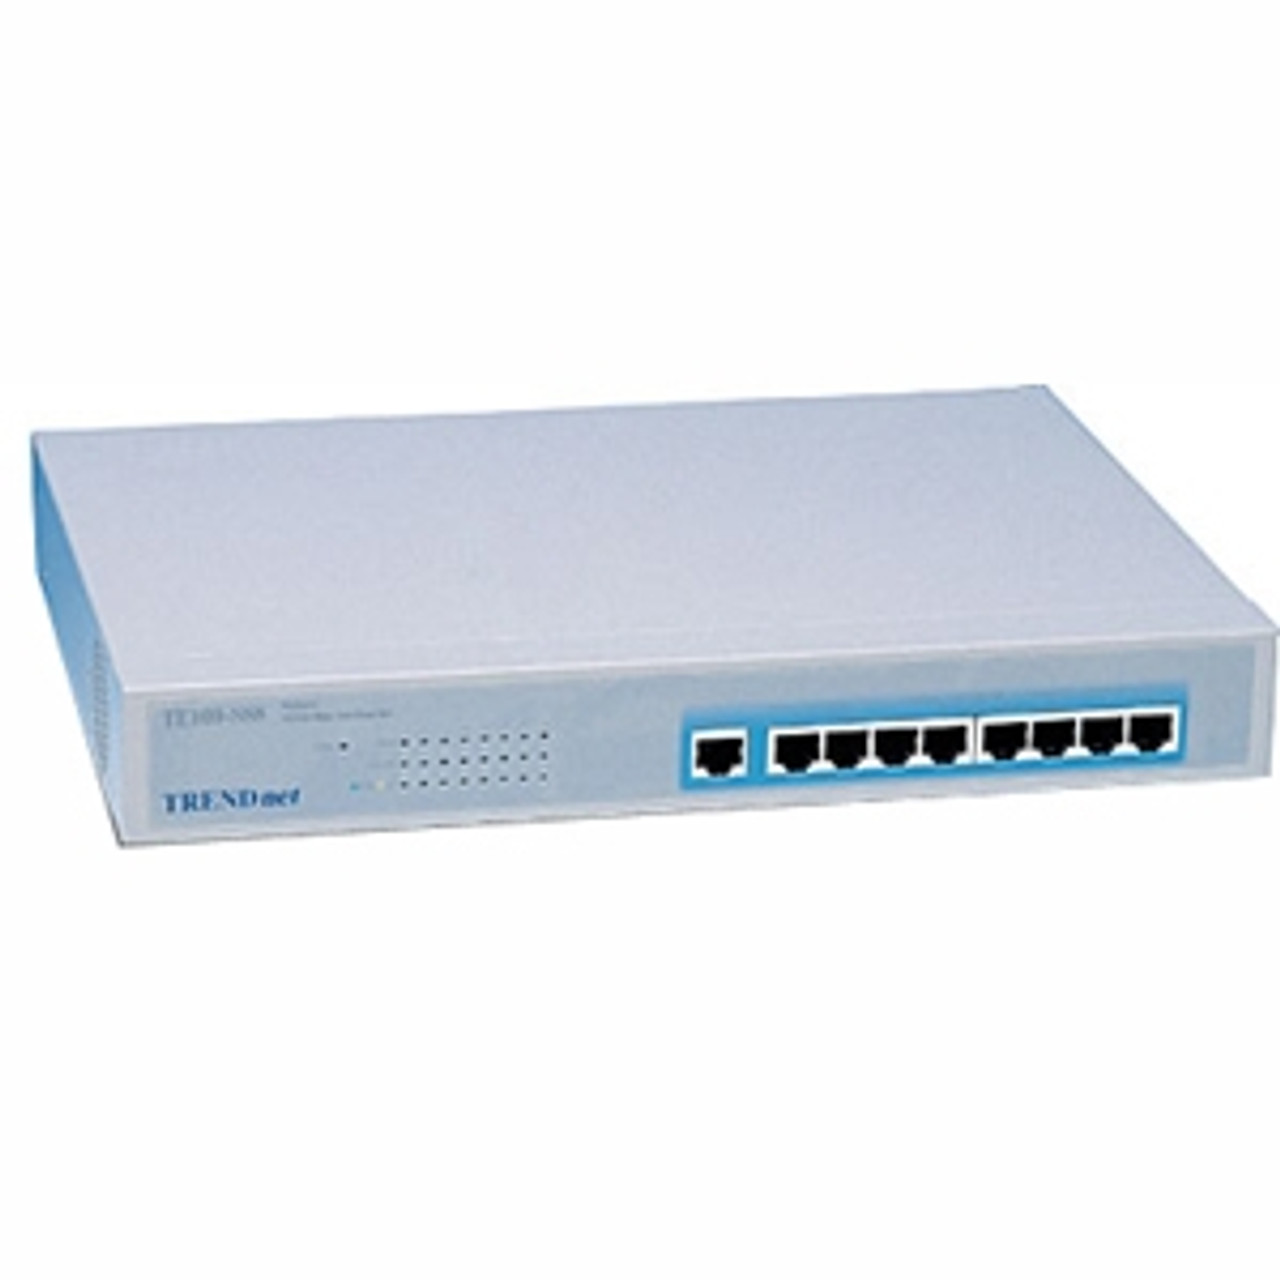 TE100-S88 TRENDnet ProXpress 10/100Mbps Switching Hub (Refurbished)